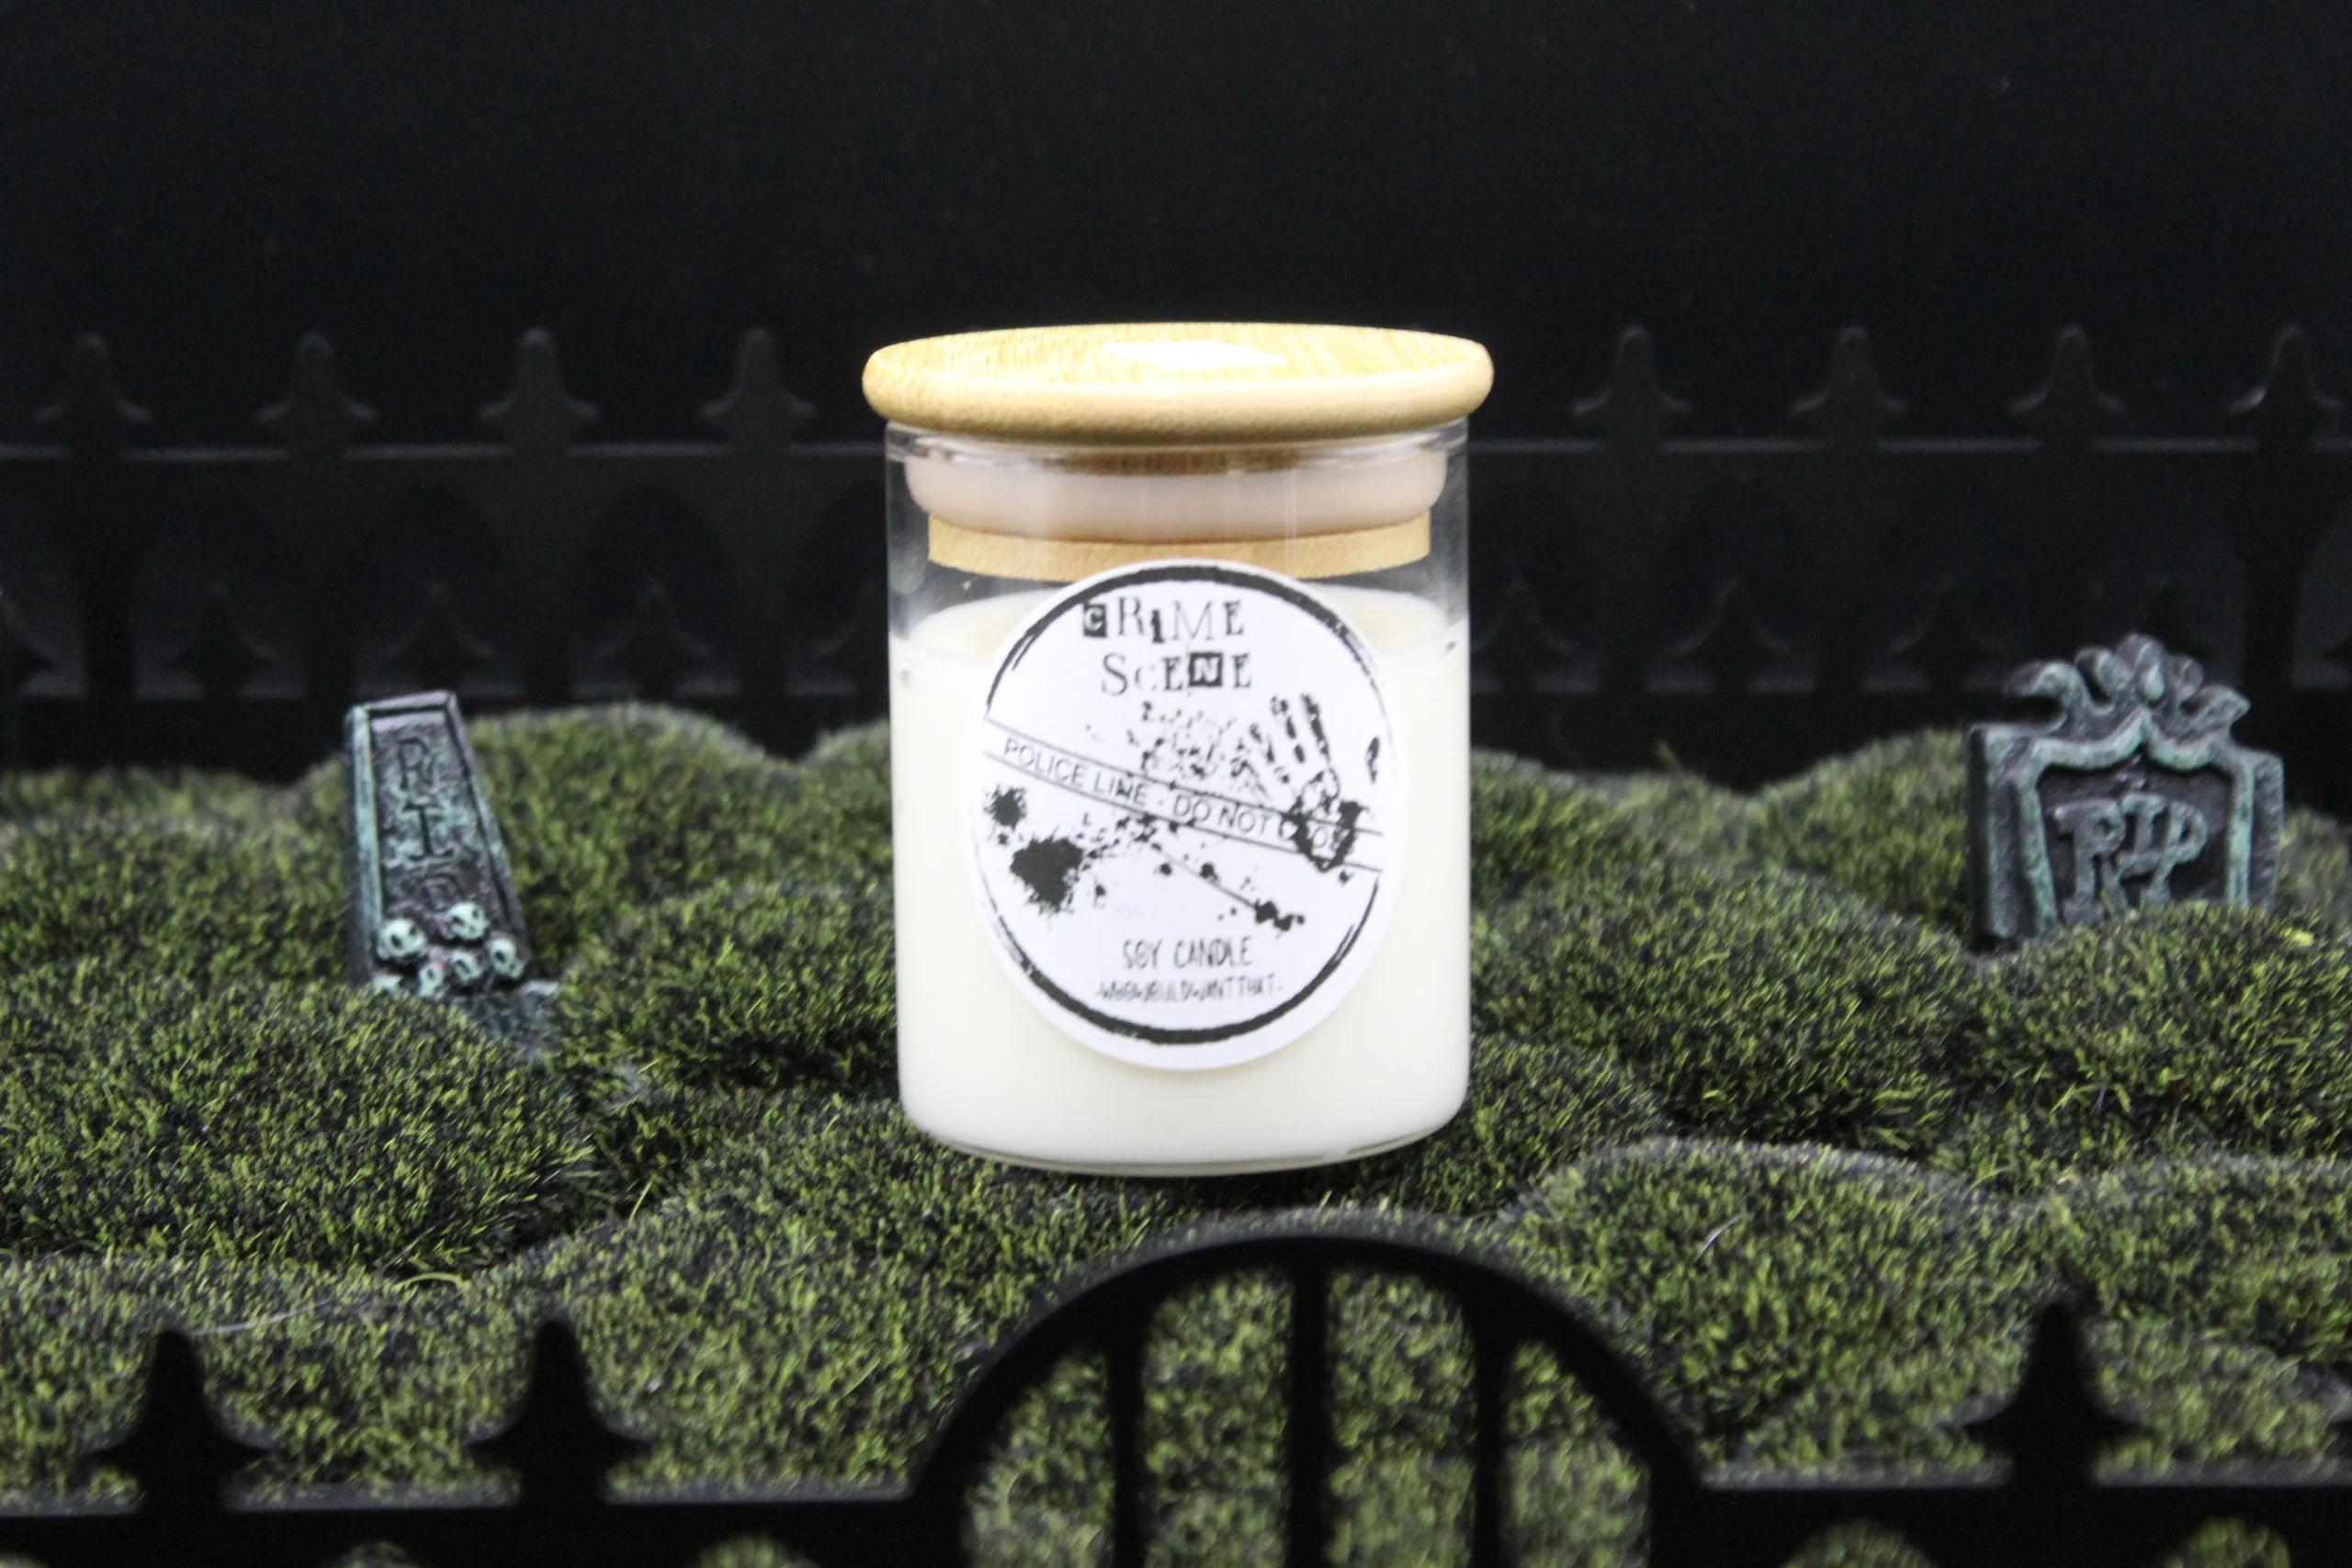 Crime Scene Candle - 8 oz Scented Soy Candle - Who Would Want That